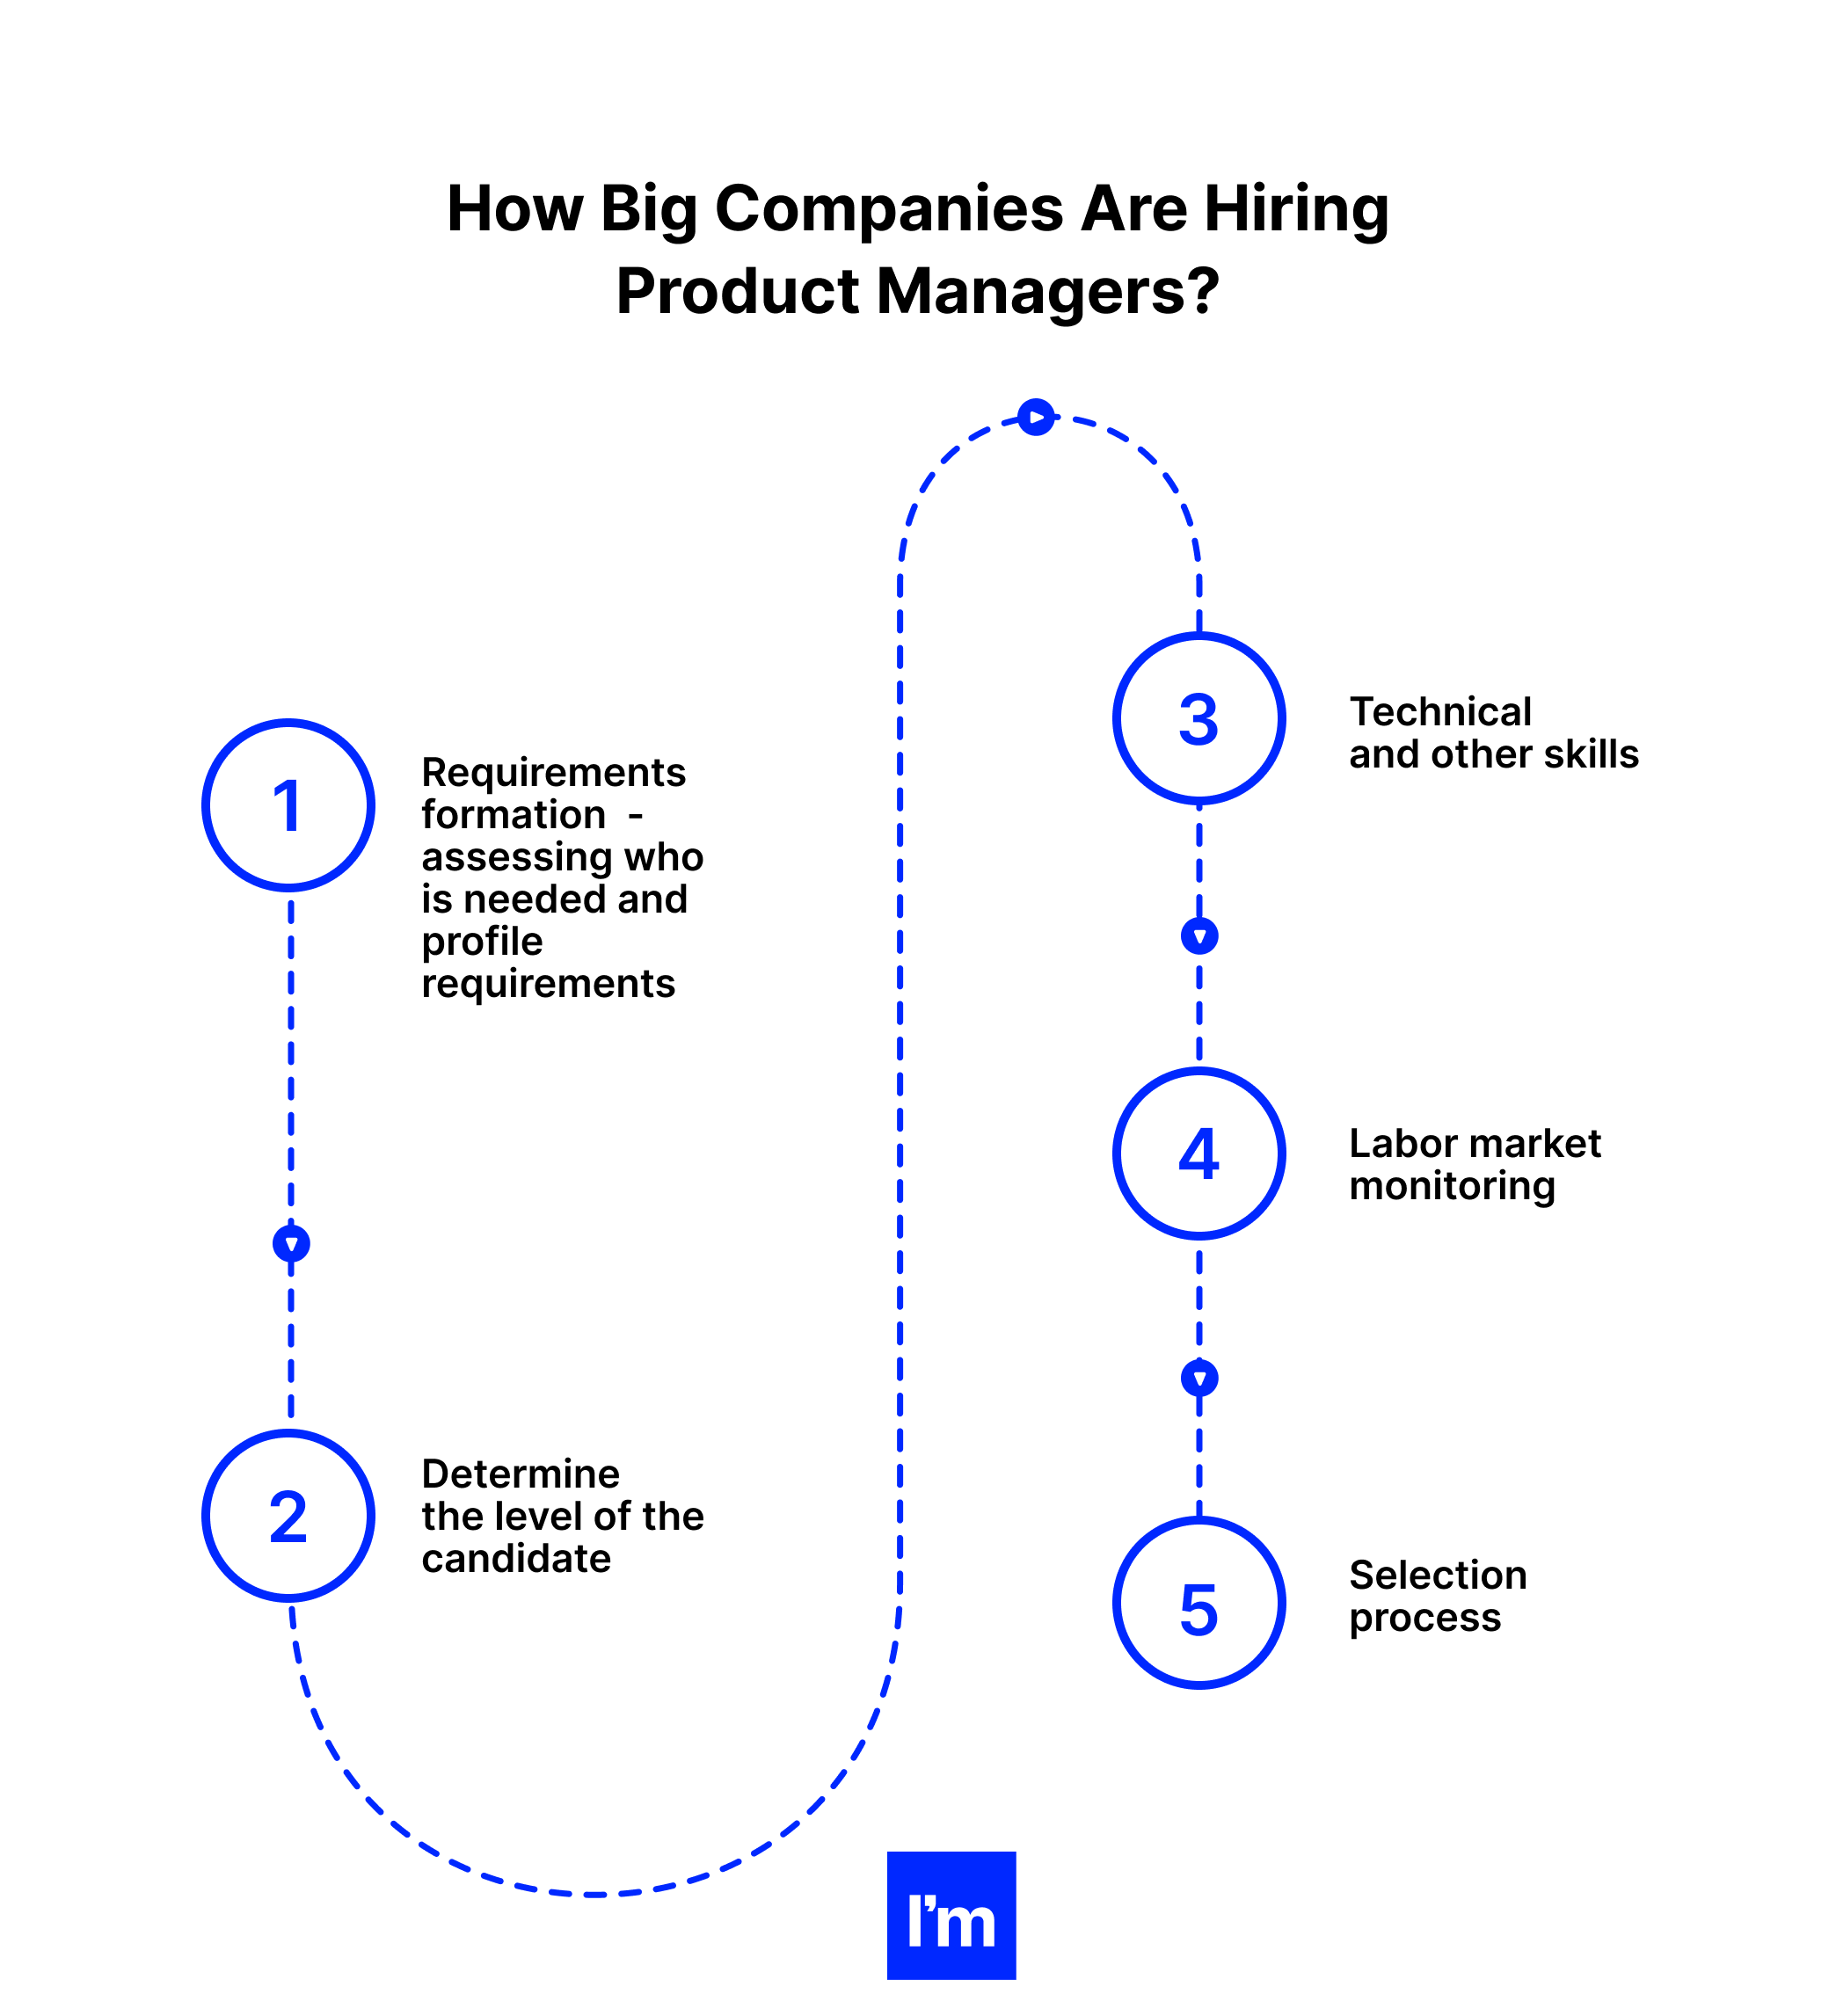 How big companies are hiring product managers?